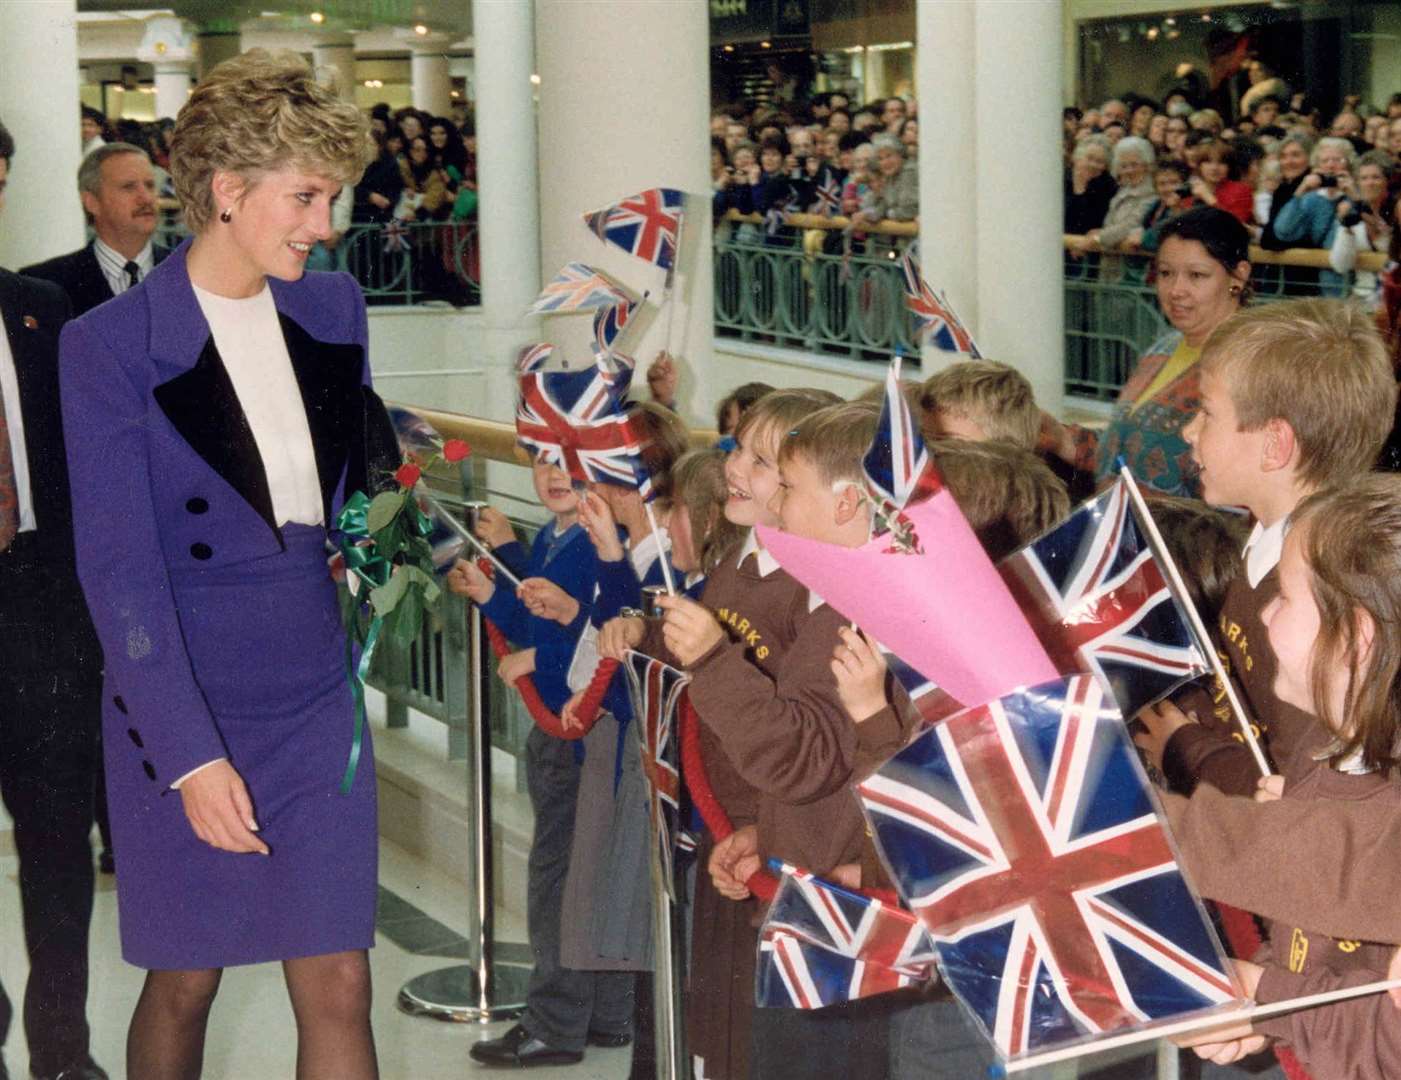 Princess Diana at the opening of the Royal Victoria Place shopping centre in Tunbridge Wells